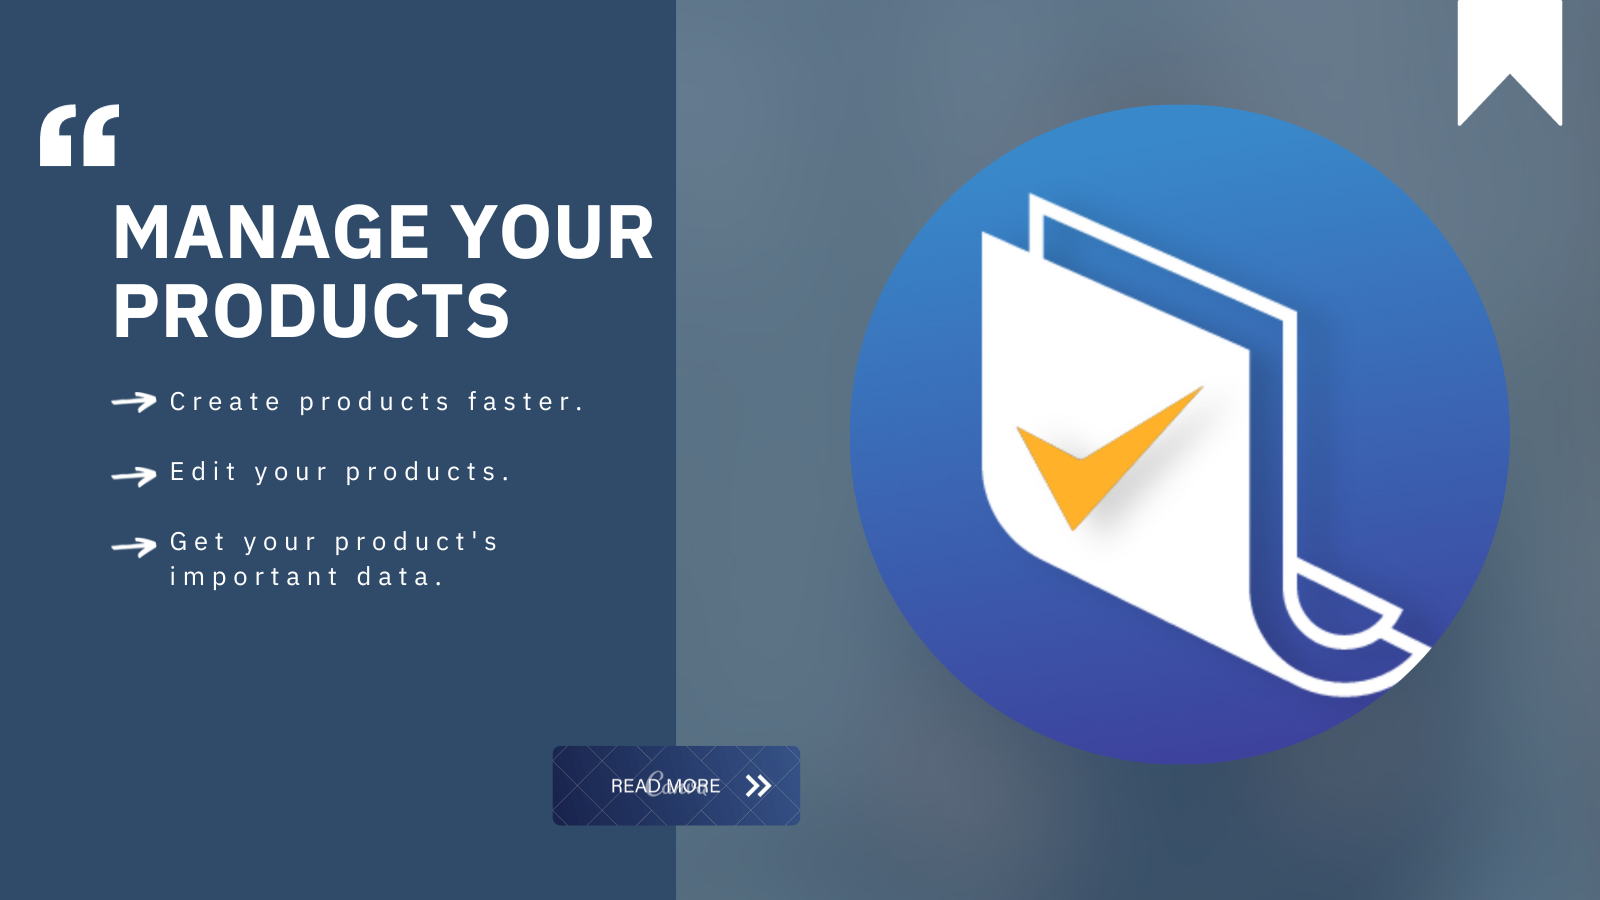 Manage your products with scrosify